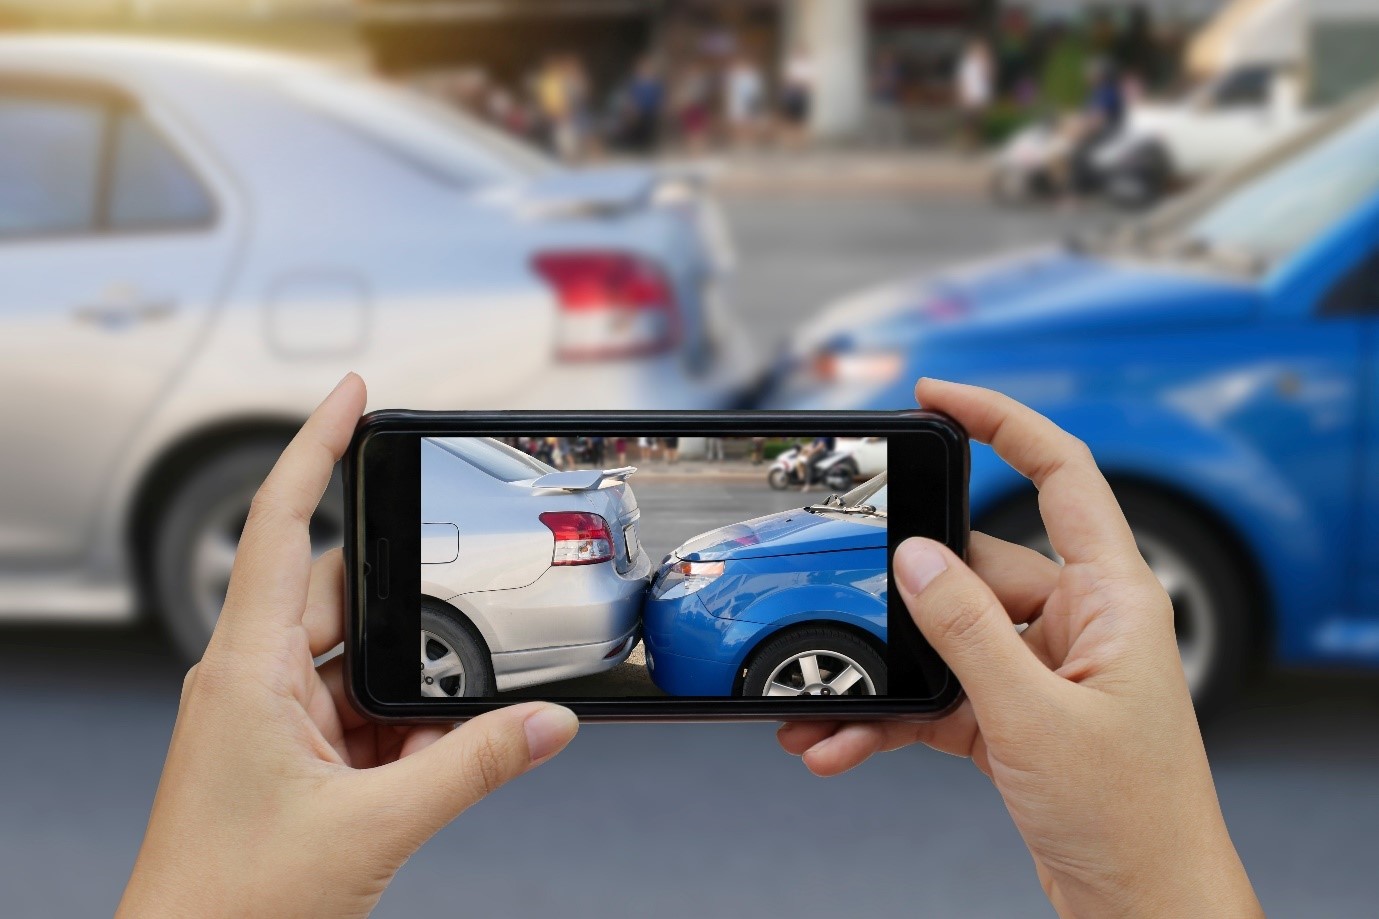 A Point of view shot looking at a landscape phone taking a picture of a car crash. A blue car crashed into a silver car